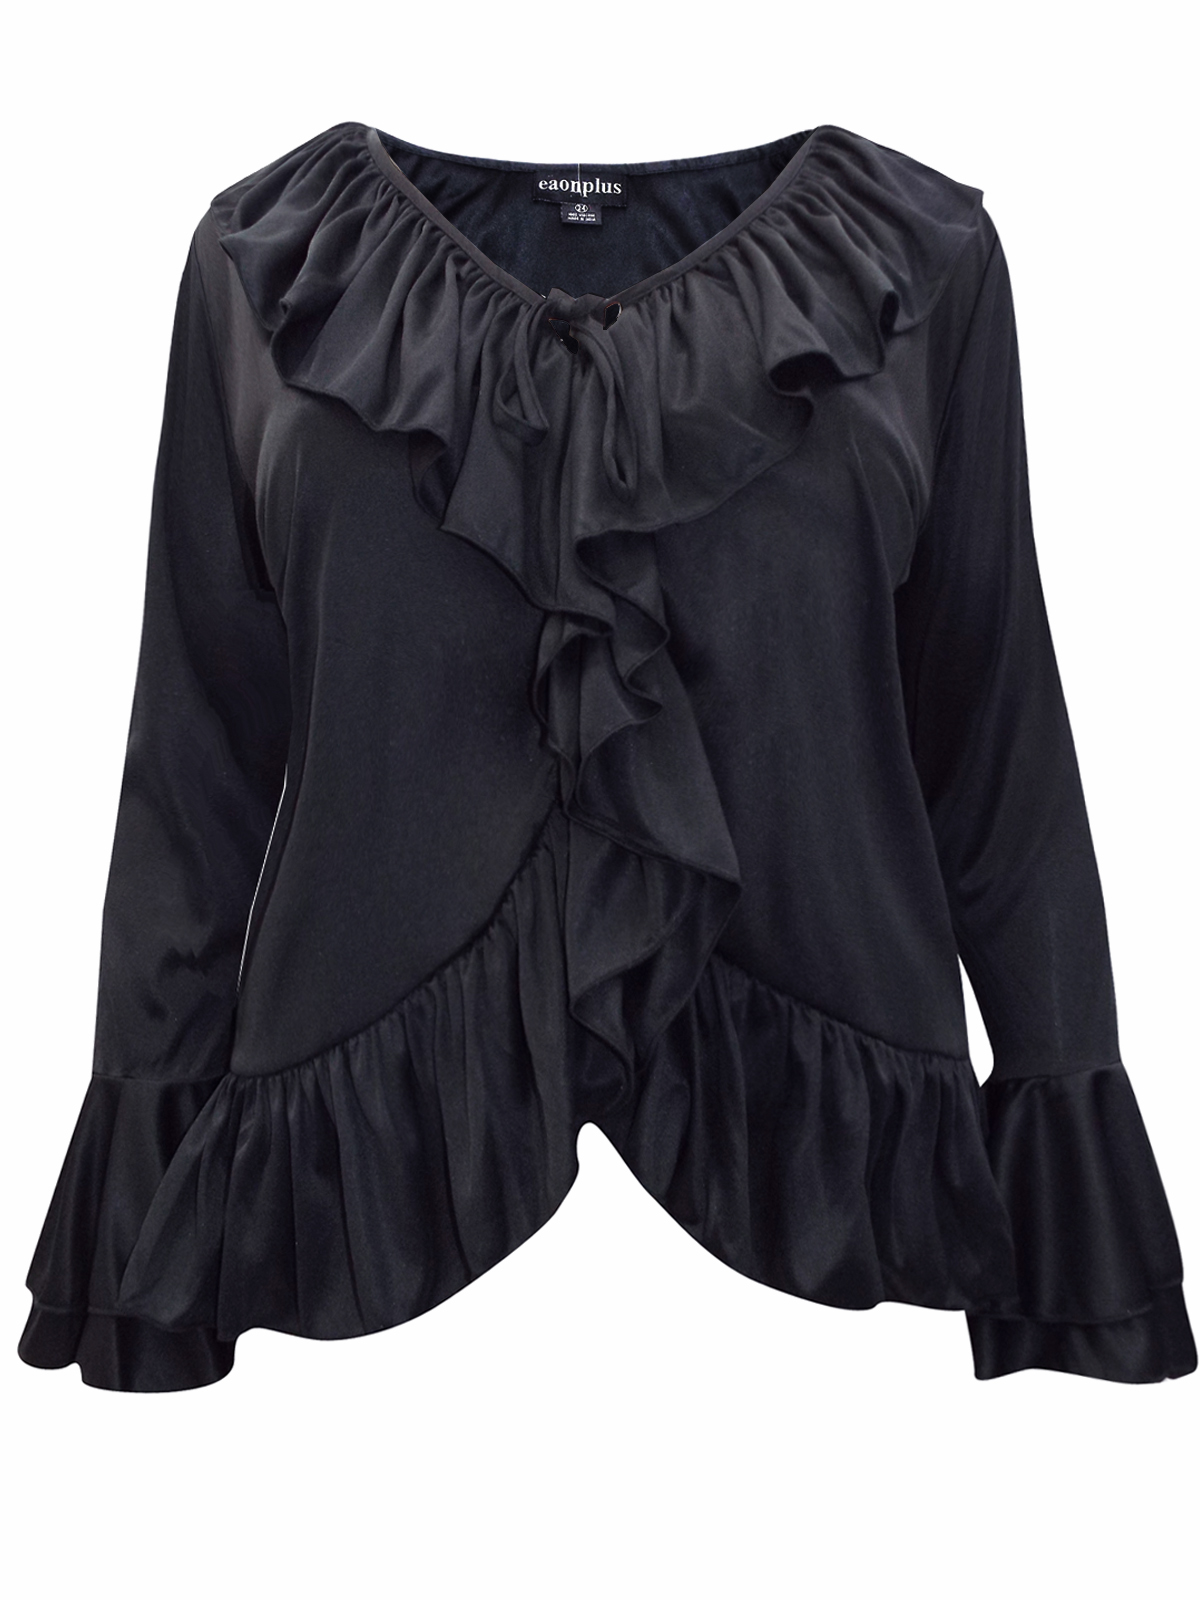 eaonplus BLACK Long Bell Sleeve Ruffle Front Blouse - Plus Size 14 to 36